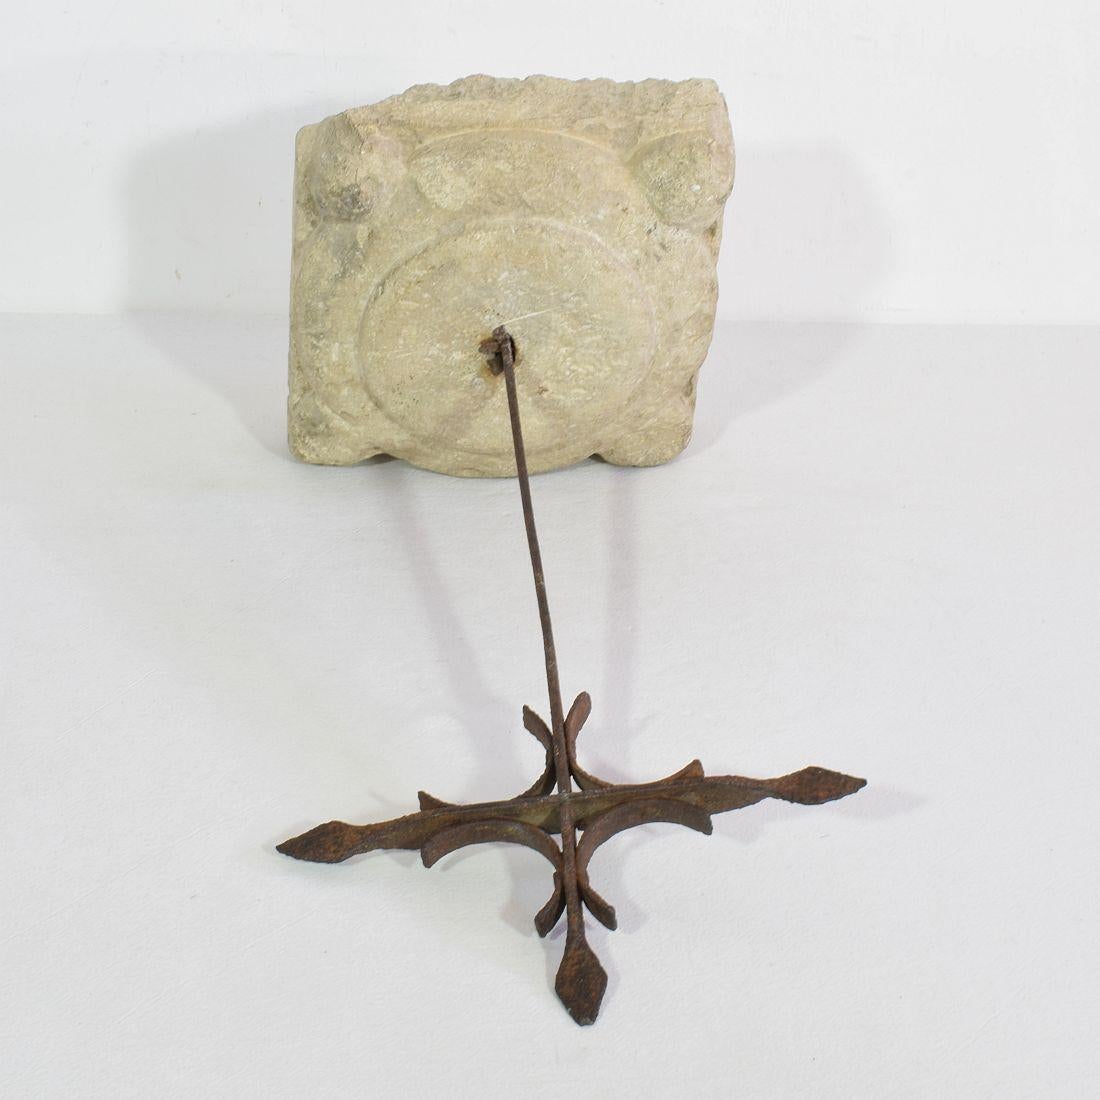 Spanish, 17/ 18th Century, Hand Forged Iron Village Cross on Carved Stone Base 14